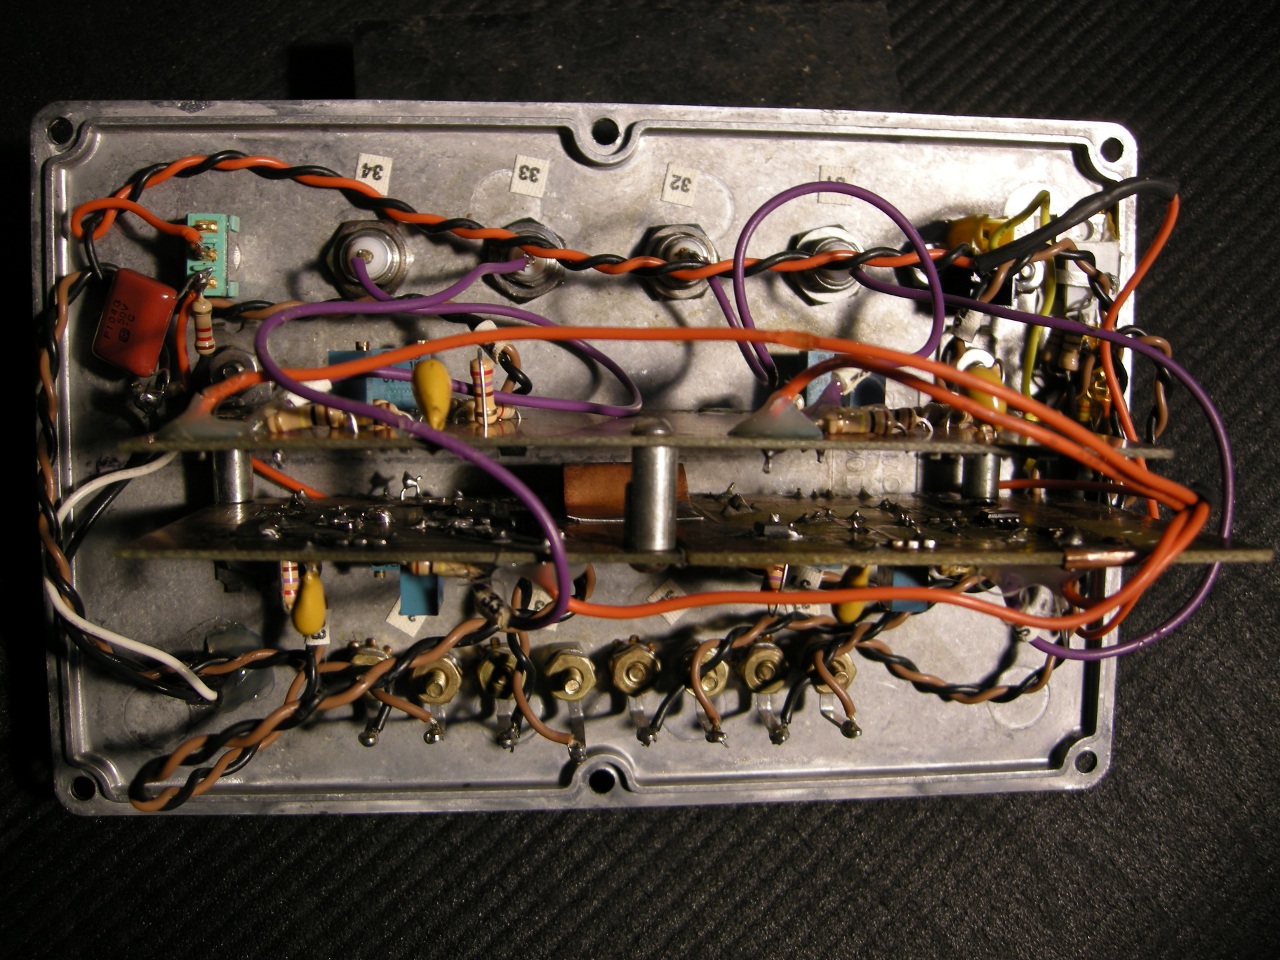 Interior view with PCBs